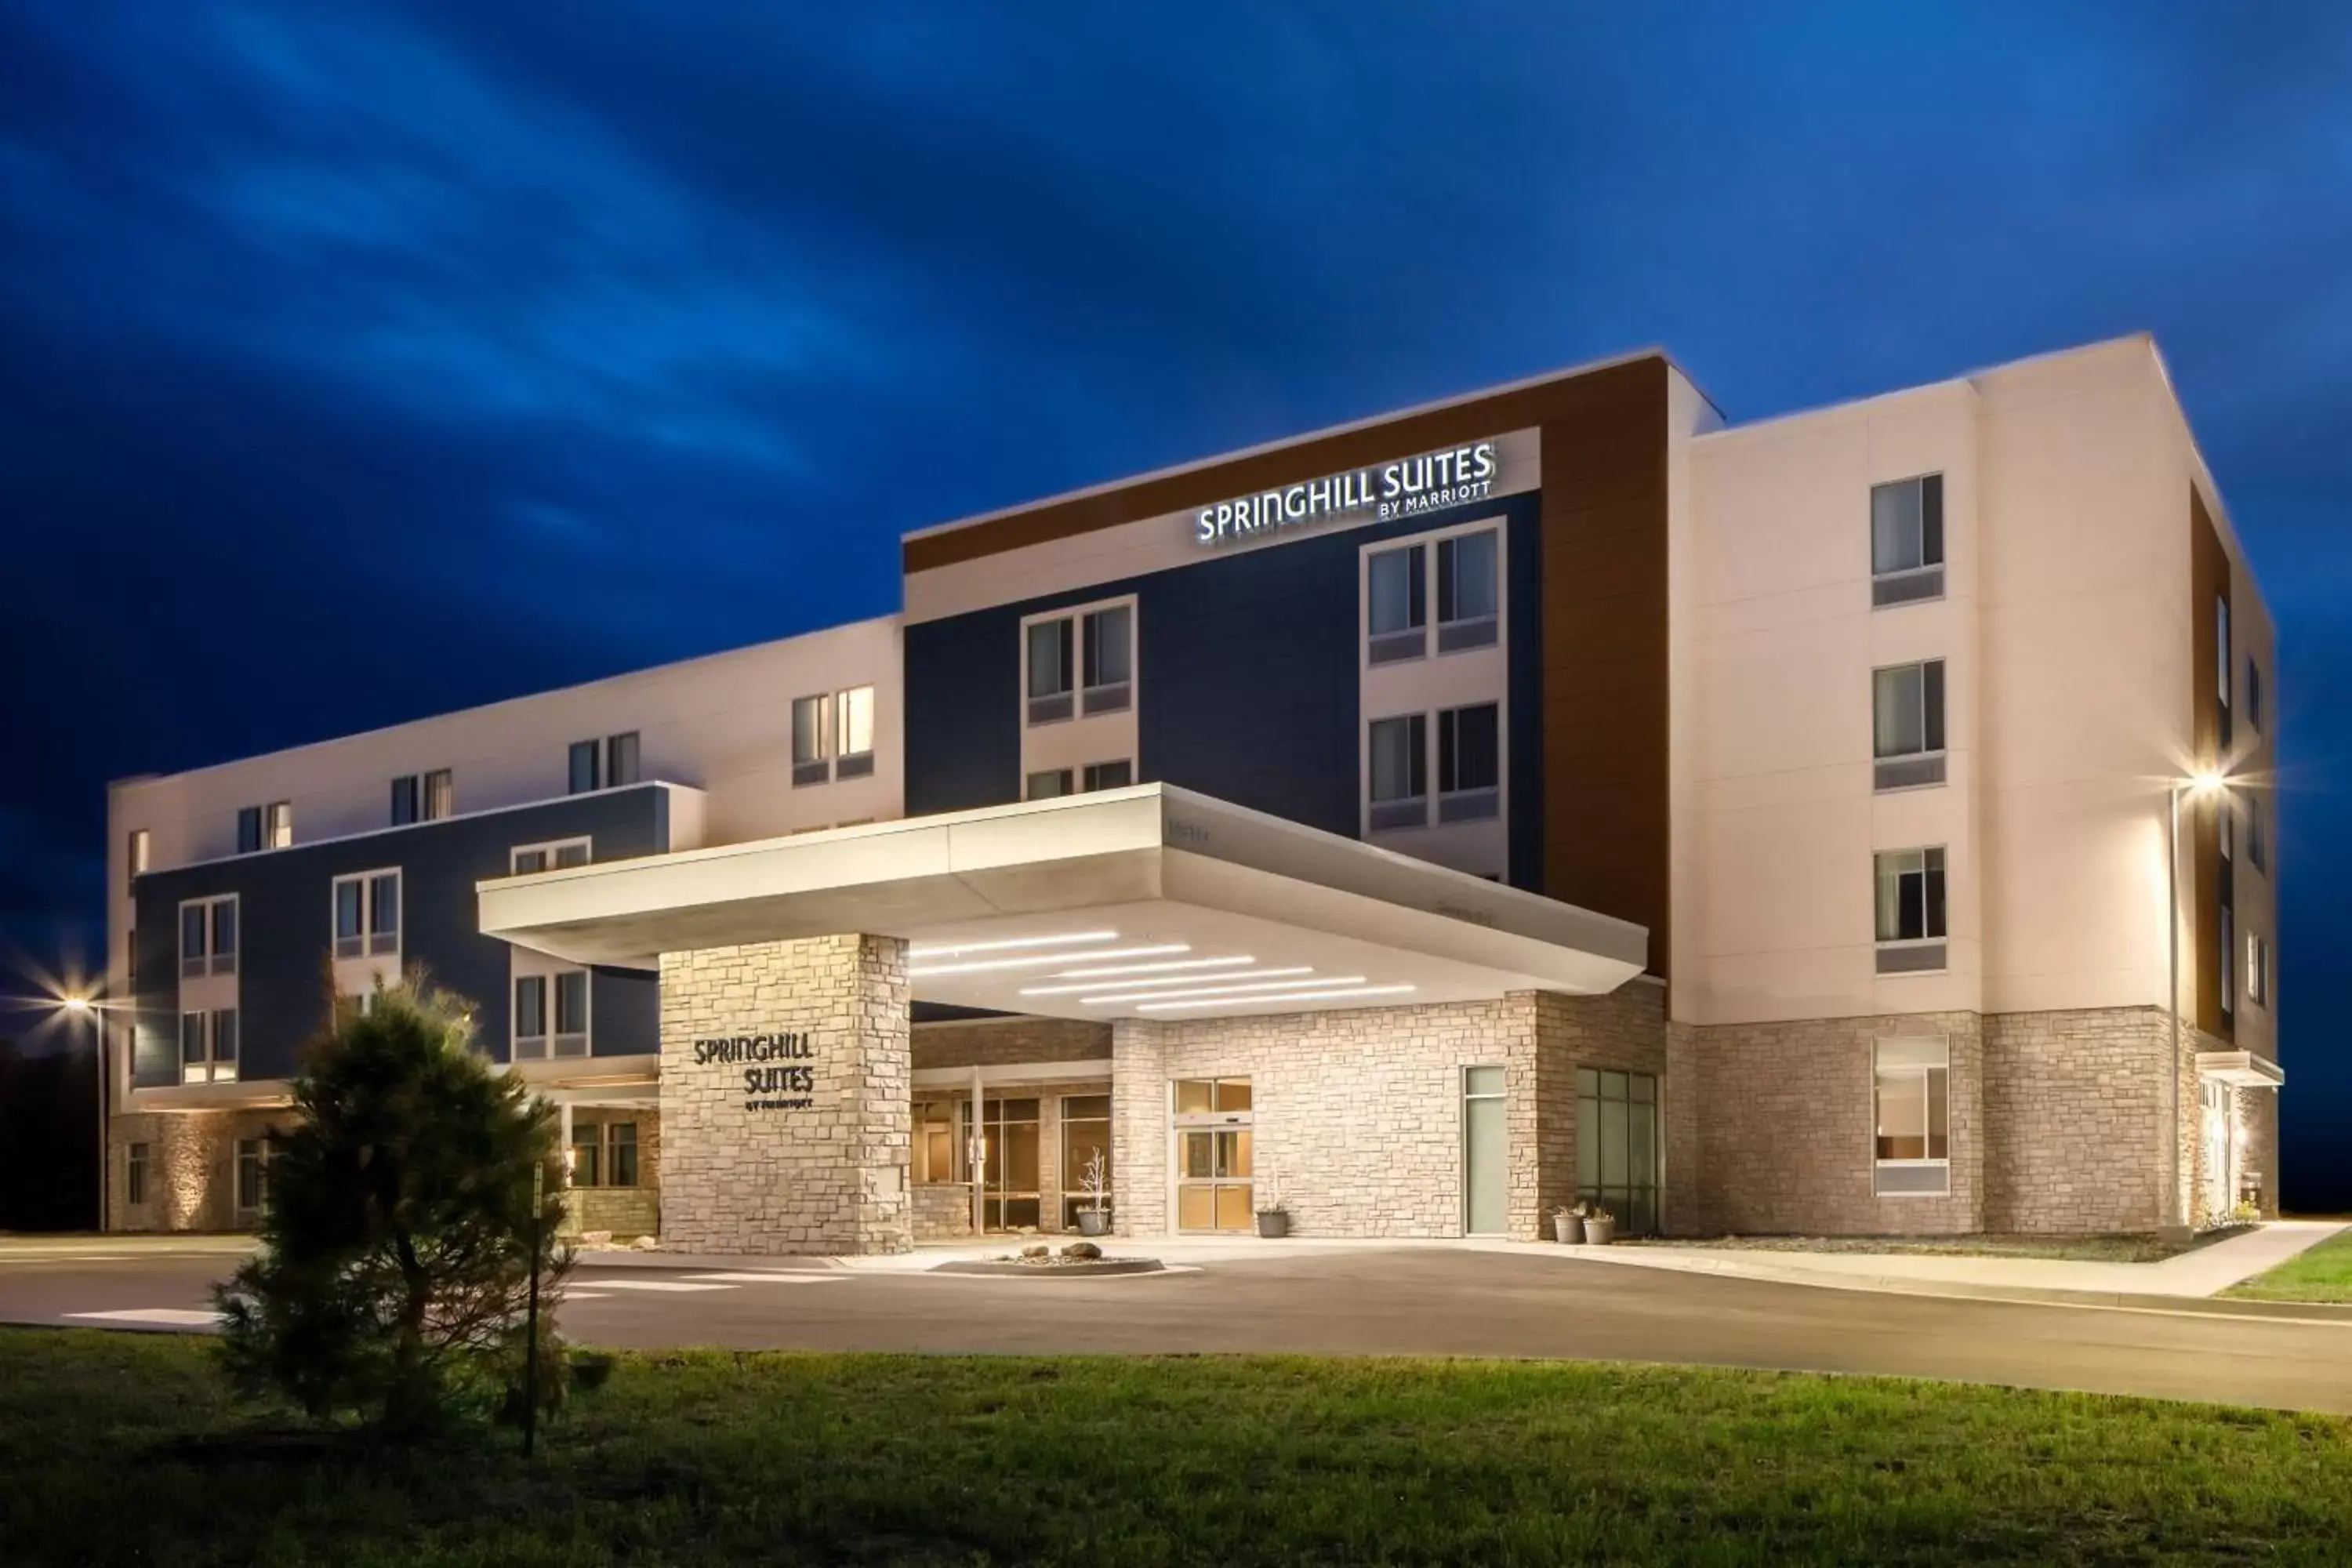 Property Building in SpringHill Suites by Marriott Ames